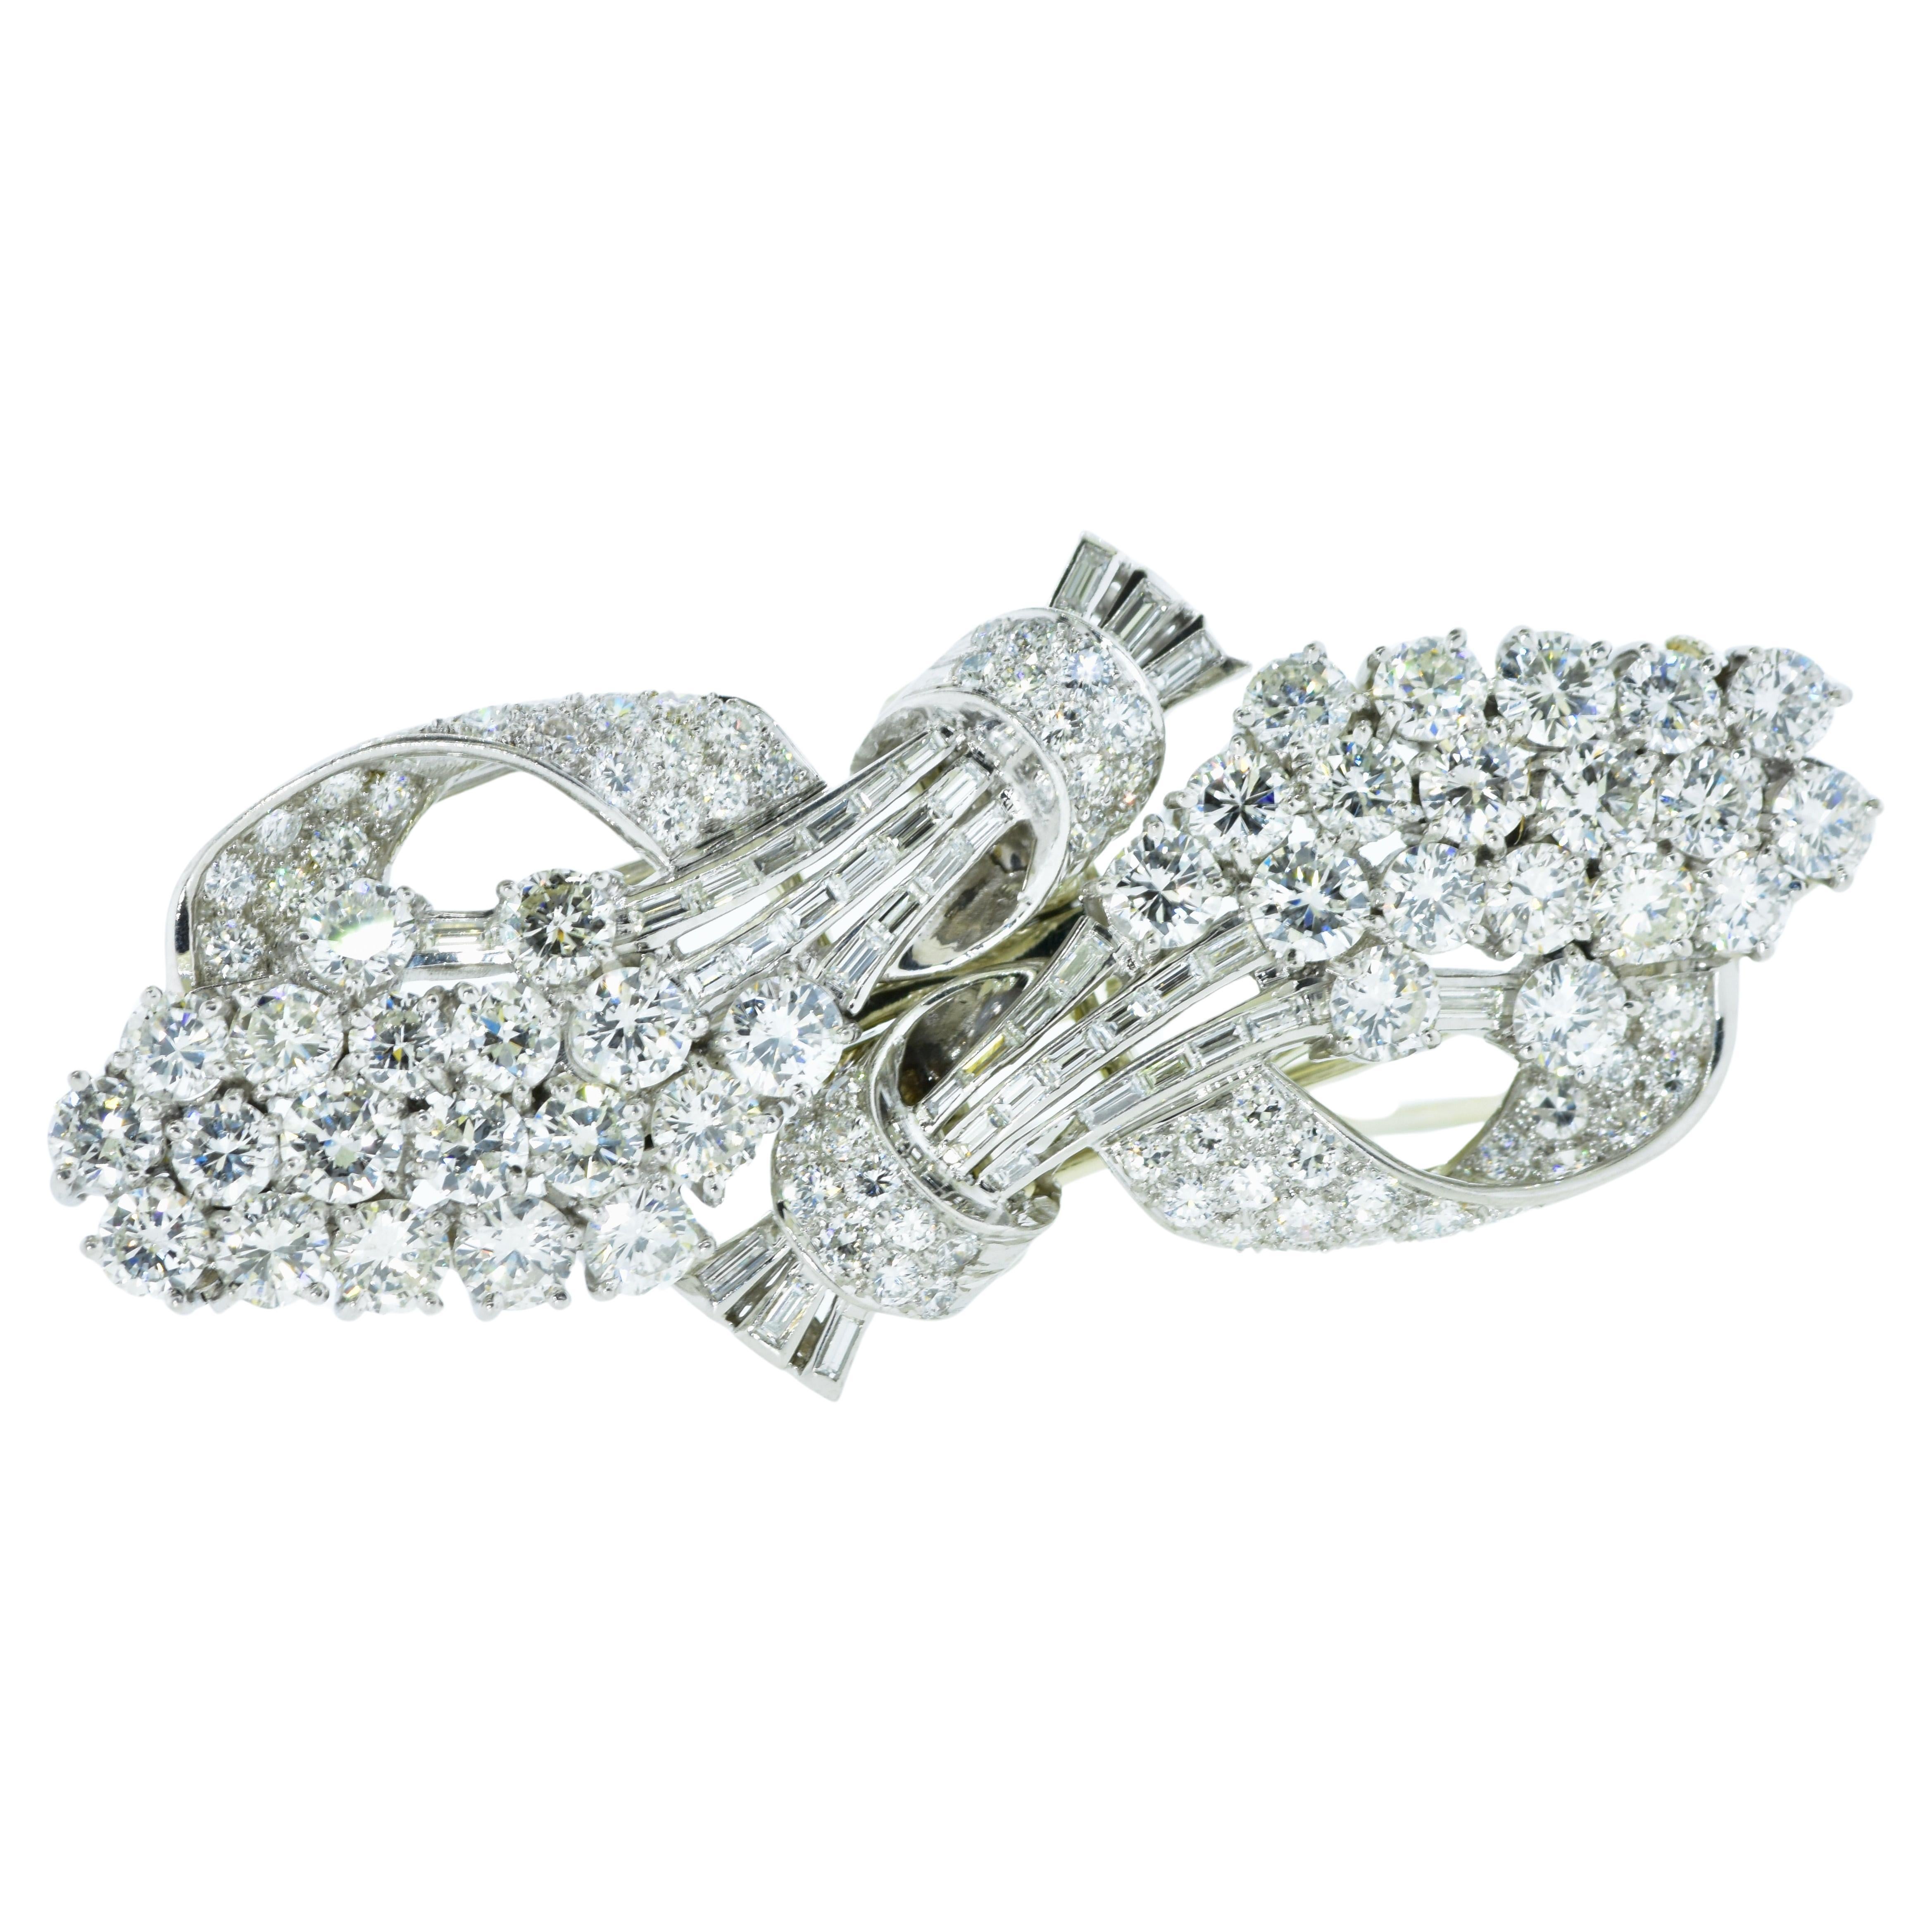 Art Deco Diamond Clips in platinum.  Well made with fine white diamonds the brooch can be worn together or separated into separate dress clips.  There are 10 cts of near colorless (G/H) in both European cut diamonds are baguette cut diamonds.  The